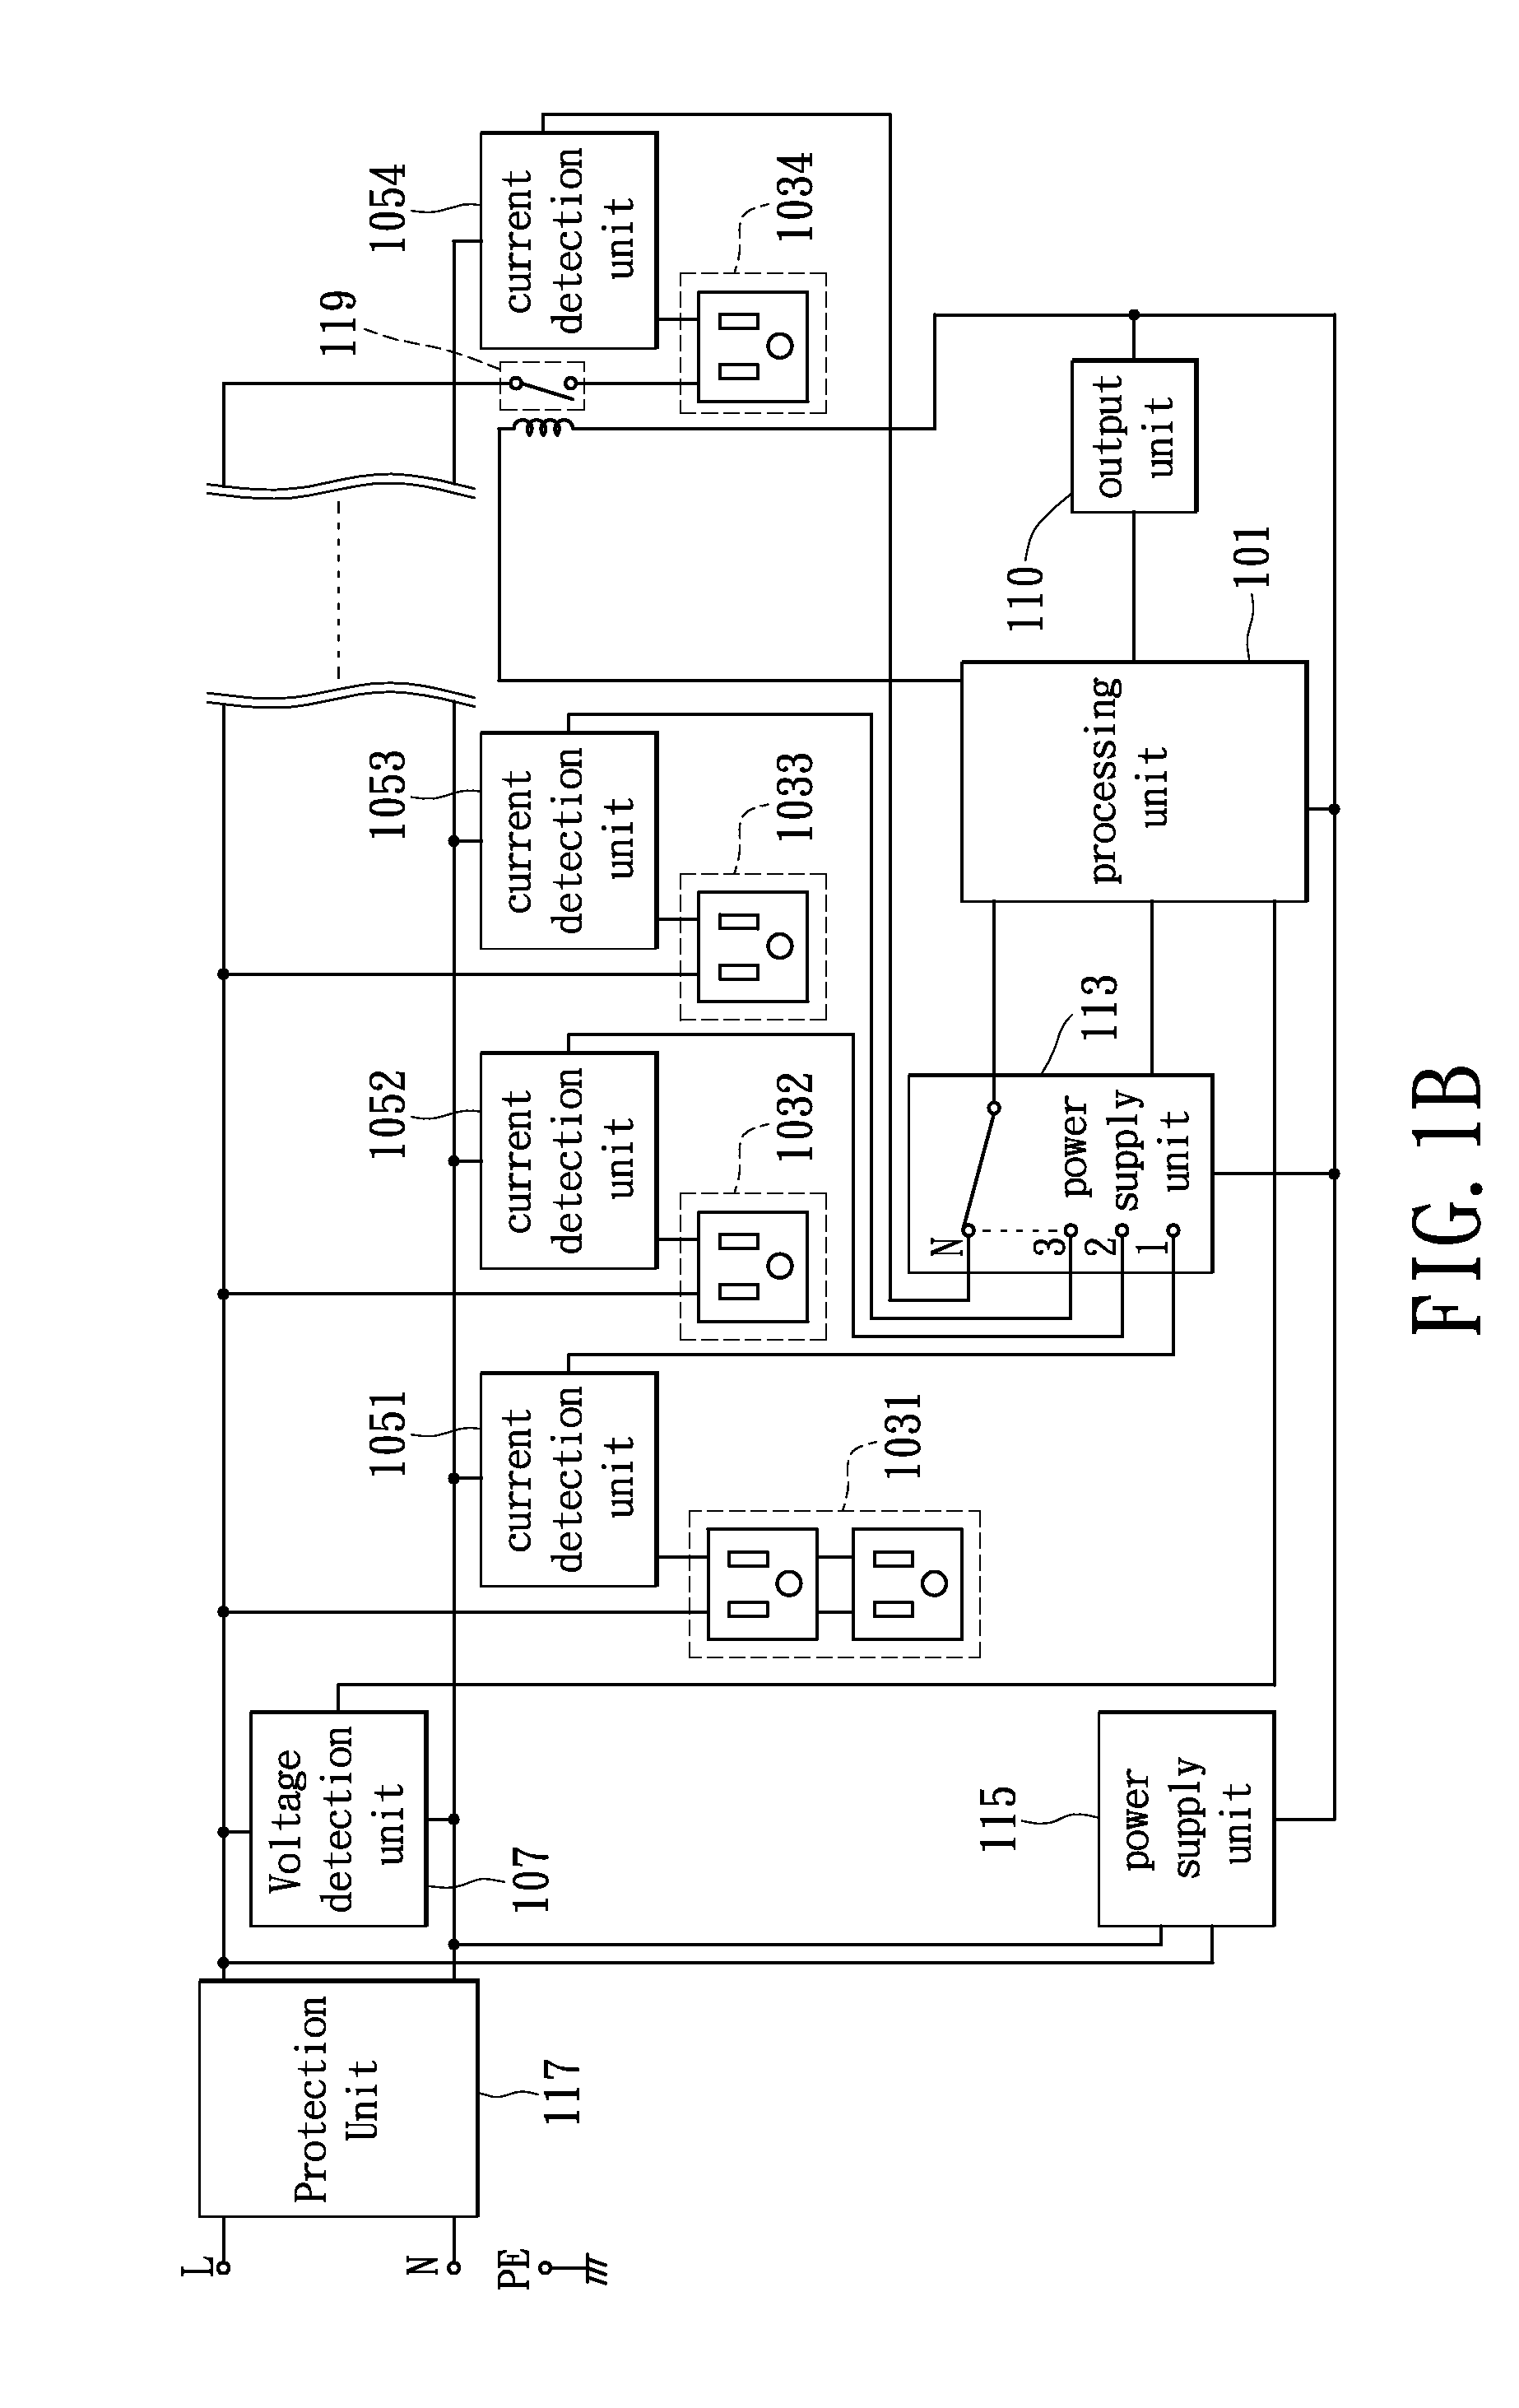 Power outlet apparatus with multiple sockets detection, and detection method thereof